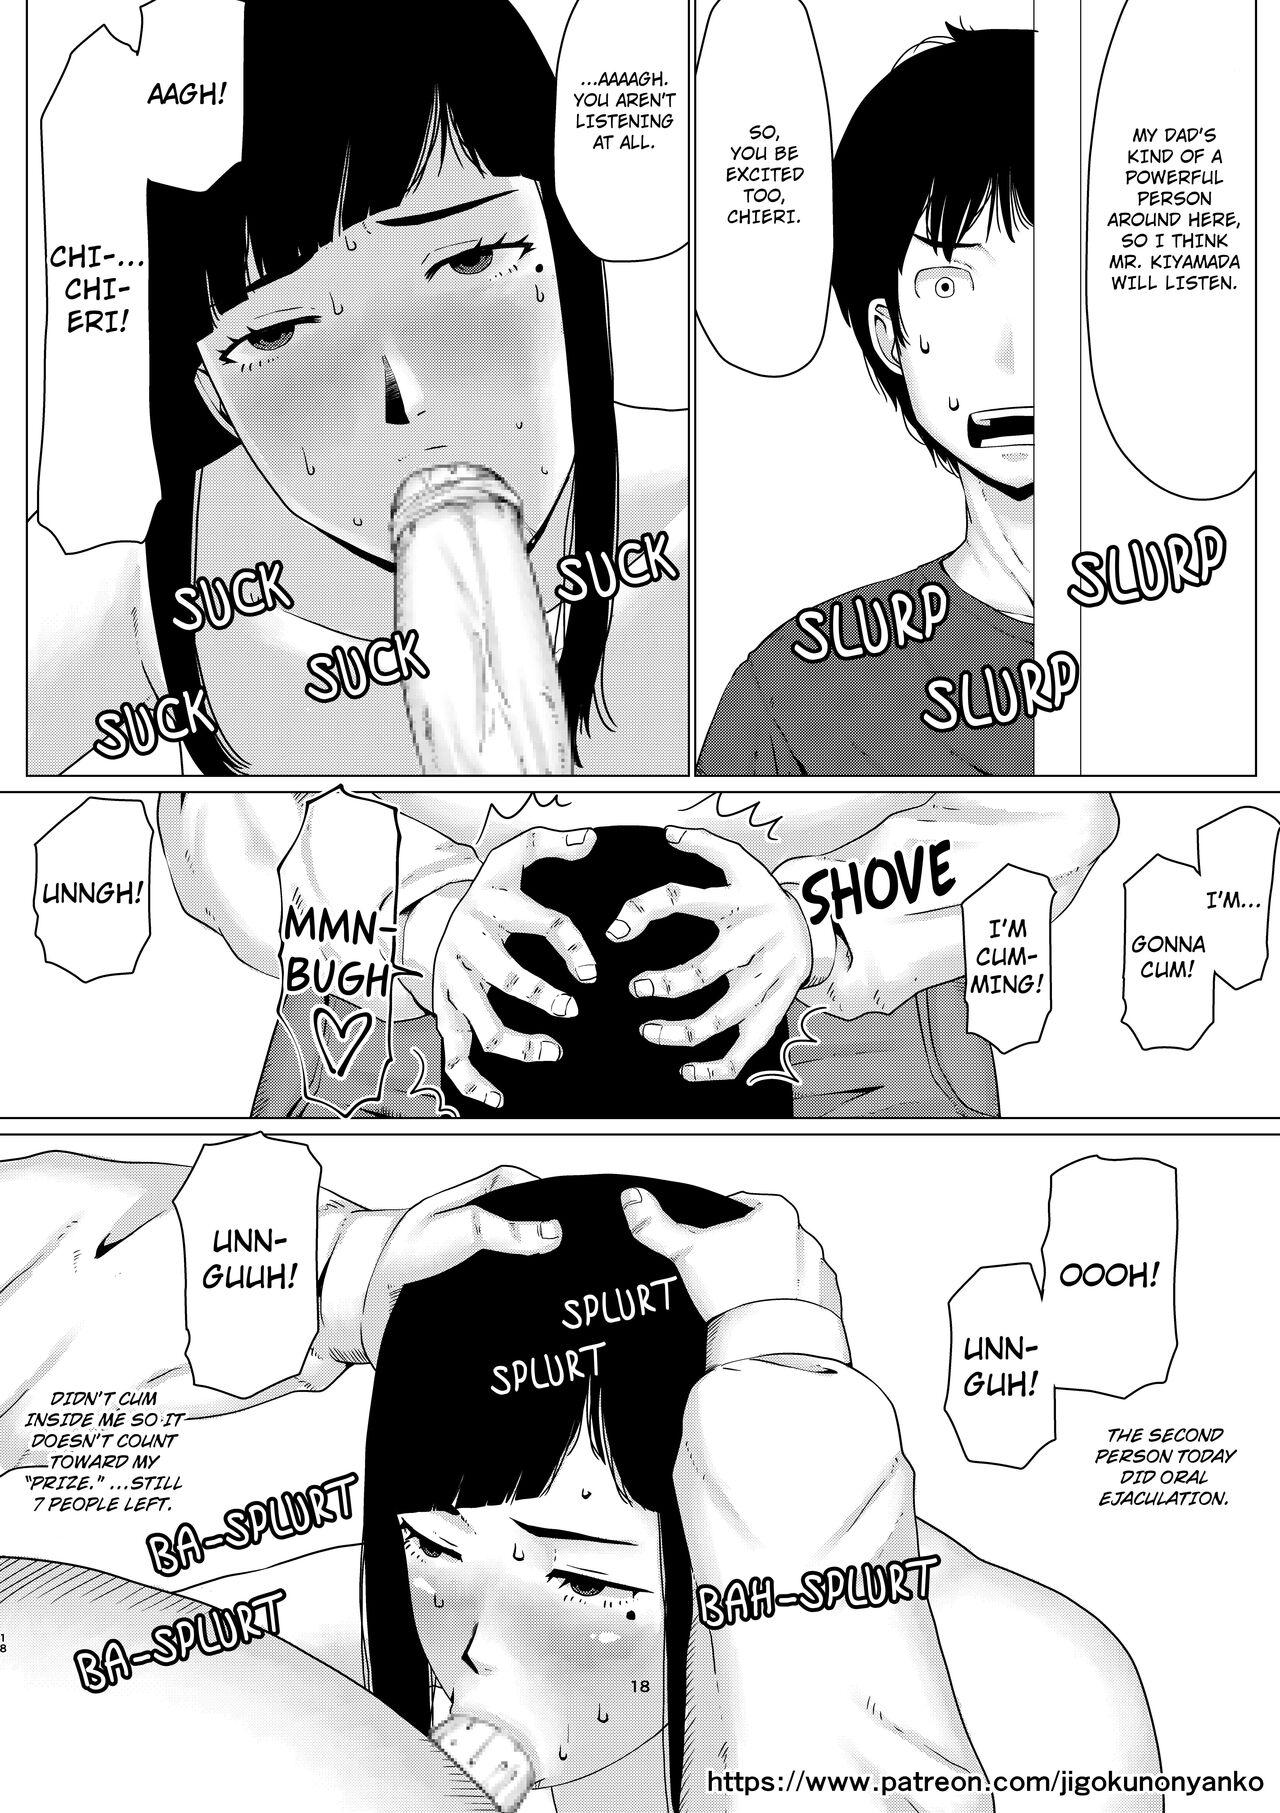 [Jigoku no Nyanko] Chieri-san Never Gives Up! 3 Part-1:Perverted toilet wife who fertilizes anyone's sperm with her husband's approval [Eng] 17